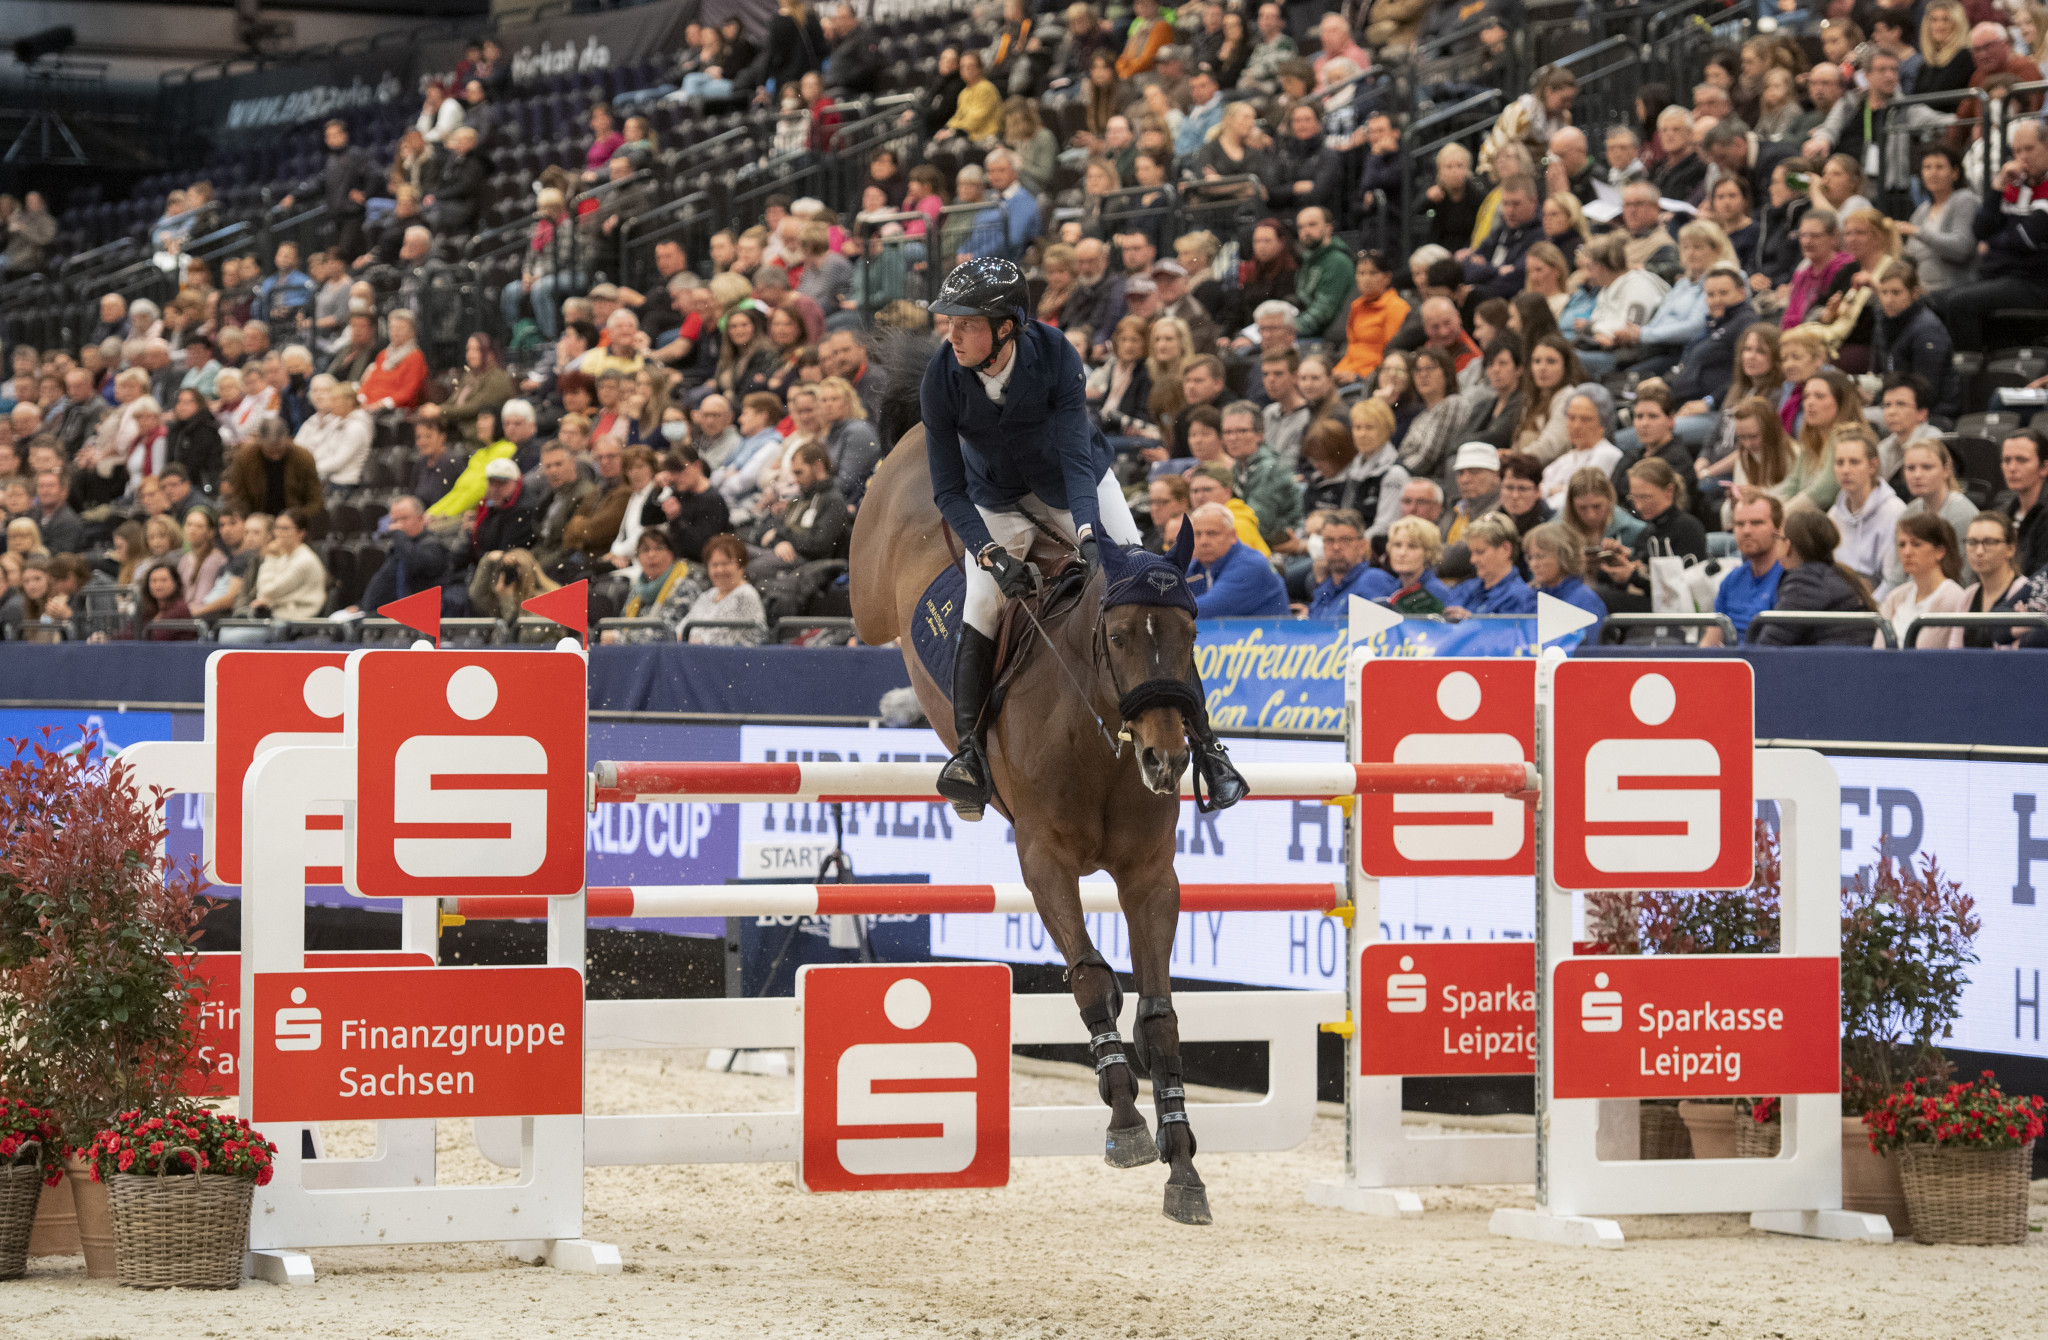 Martin Fuchs won the opening day of competition at the Jumping World Cup in Leipzig ©FEI